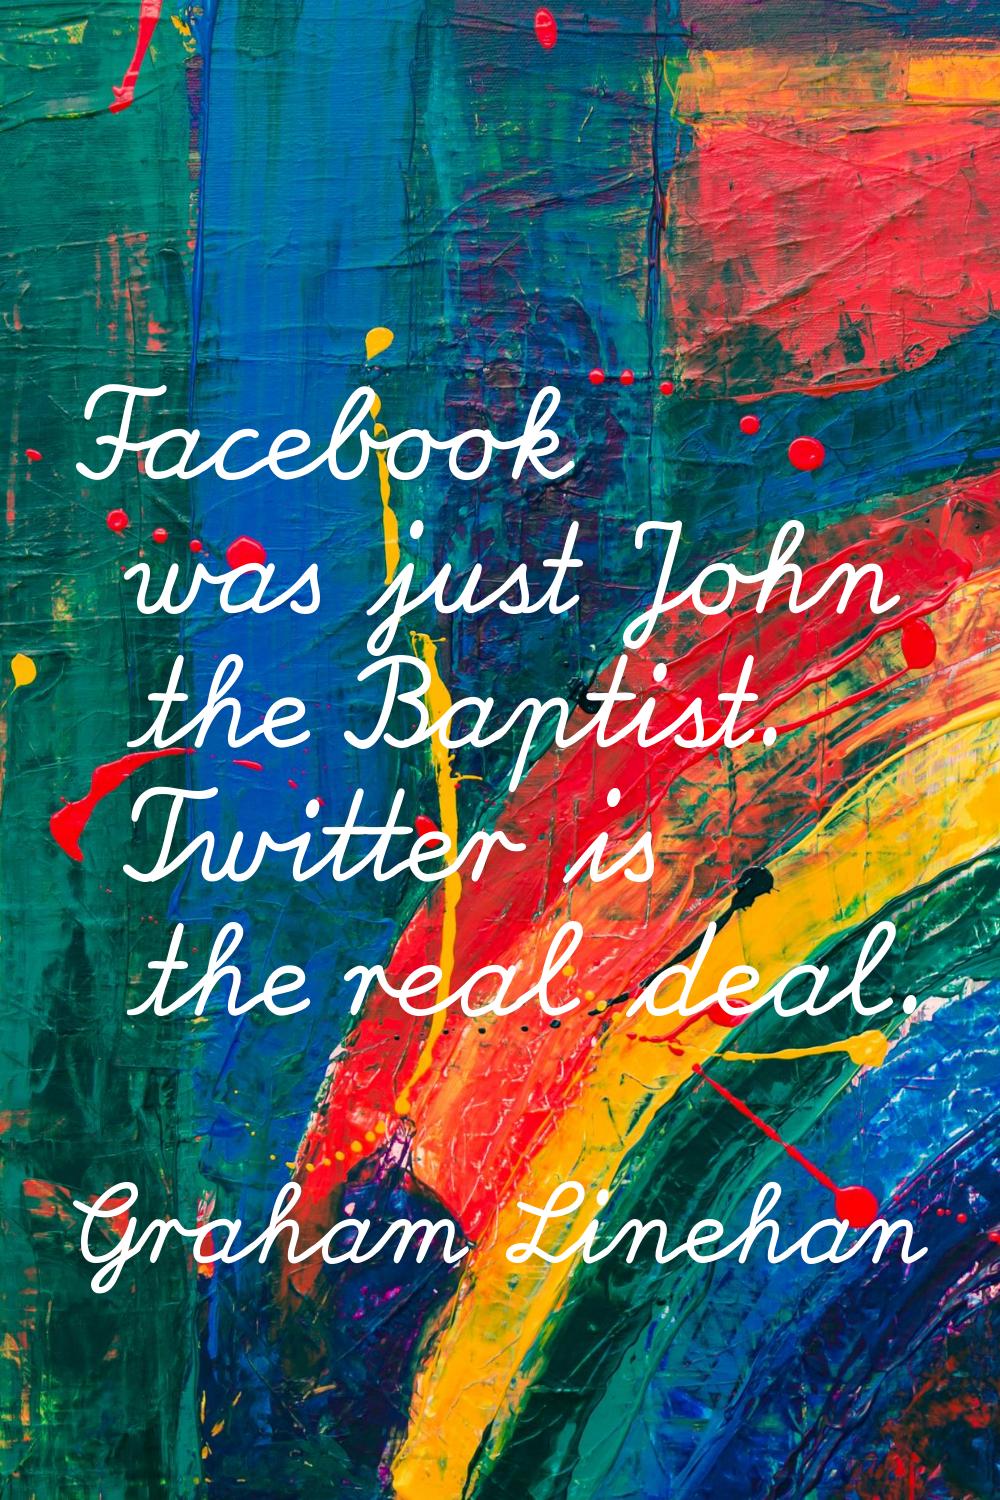 Facebook was just John the Baptist. Twitter is the real deal.